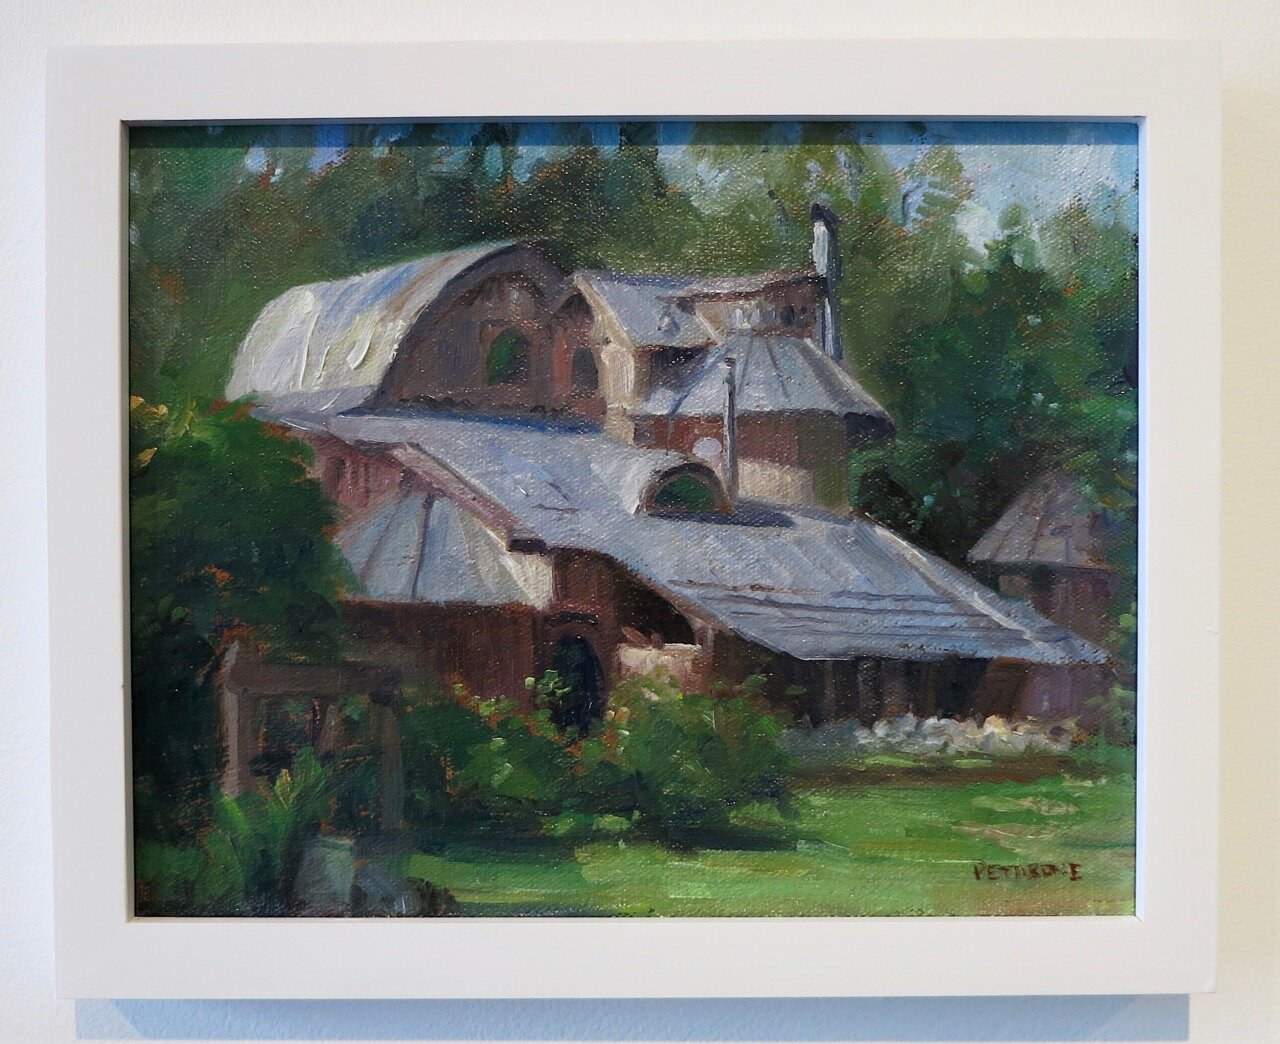    House At the Dean Family Farm , 2020   Oil on canvas  8x10 inches 